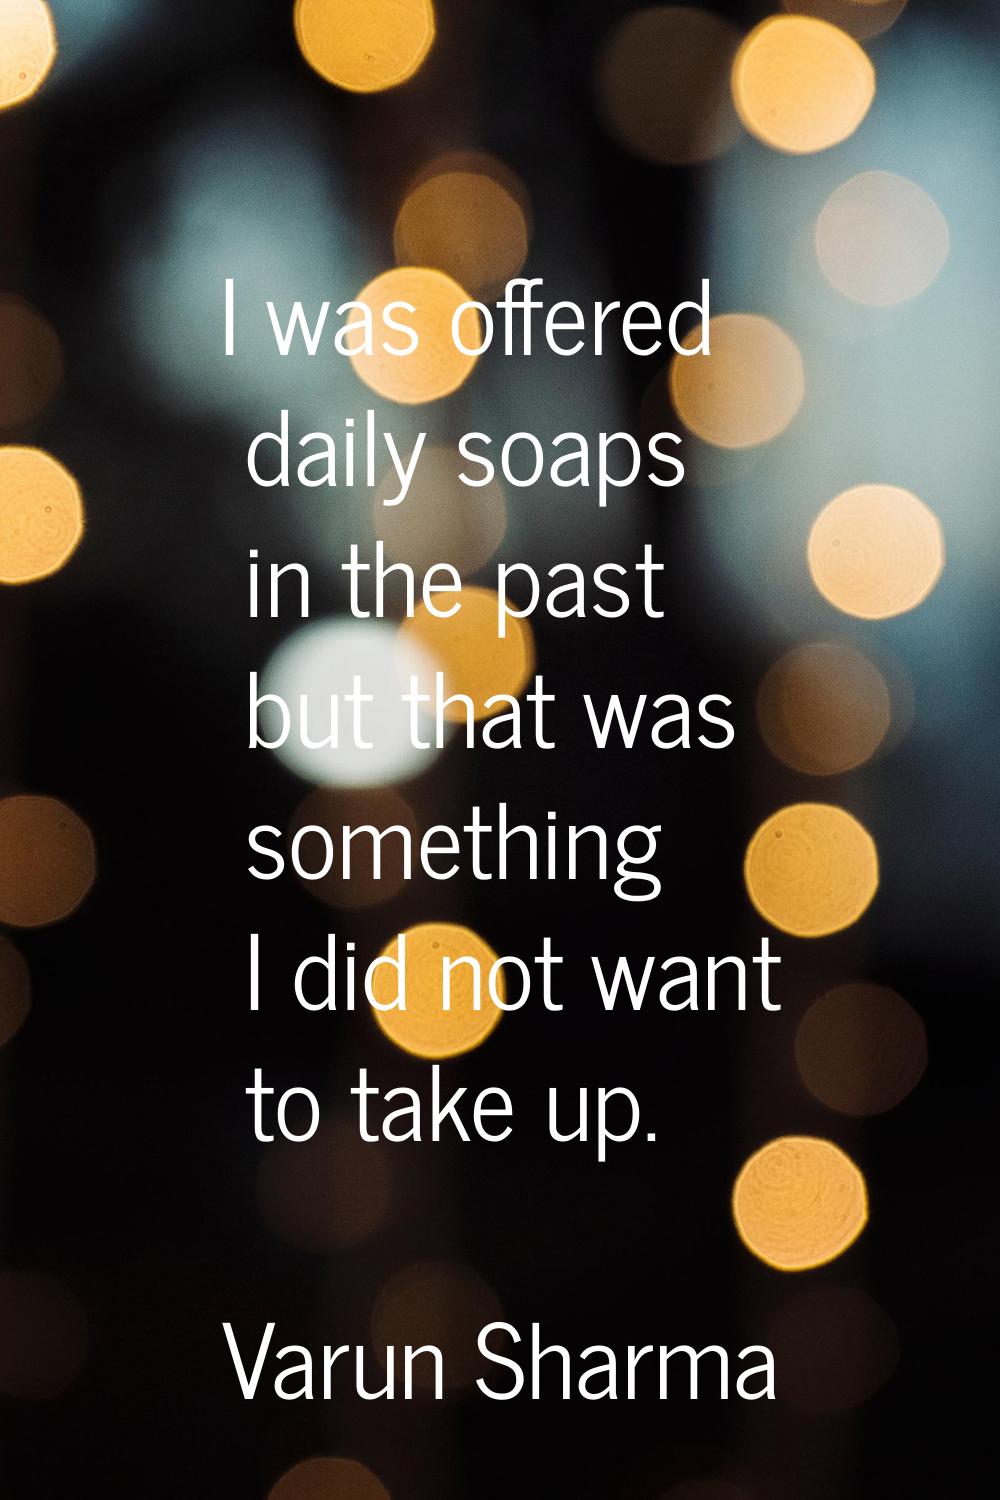 I was offered daily soaps in the past but that was something I did not want to take up.